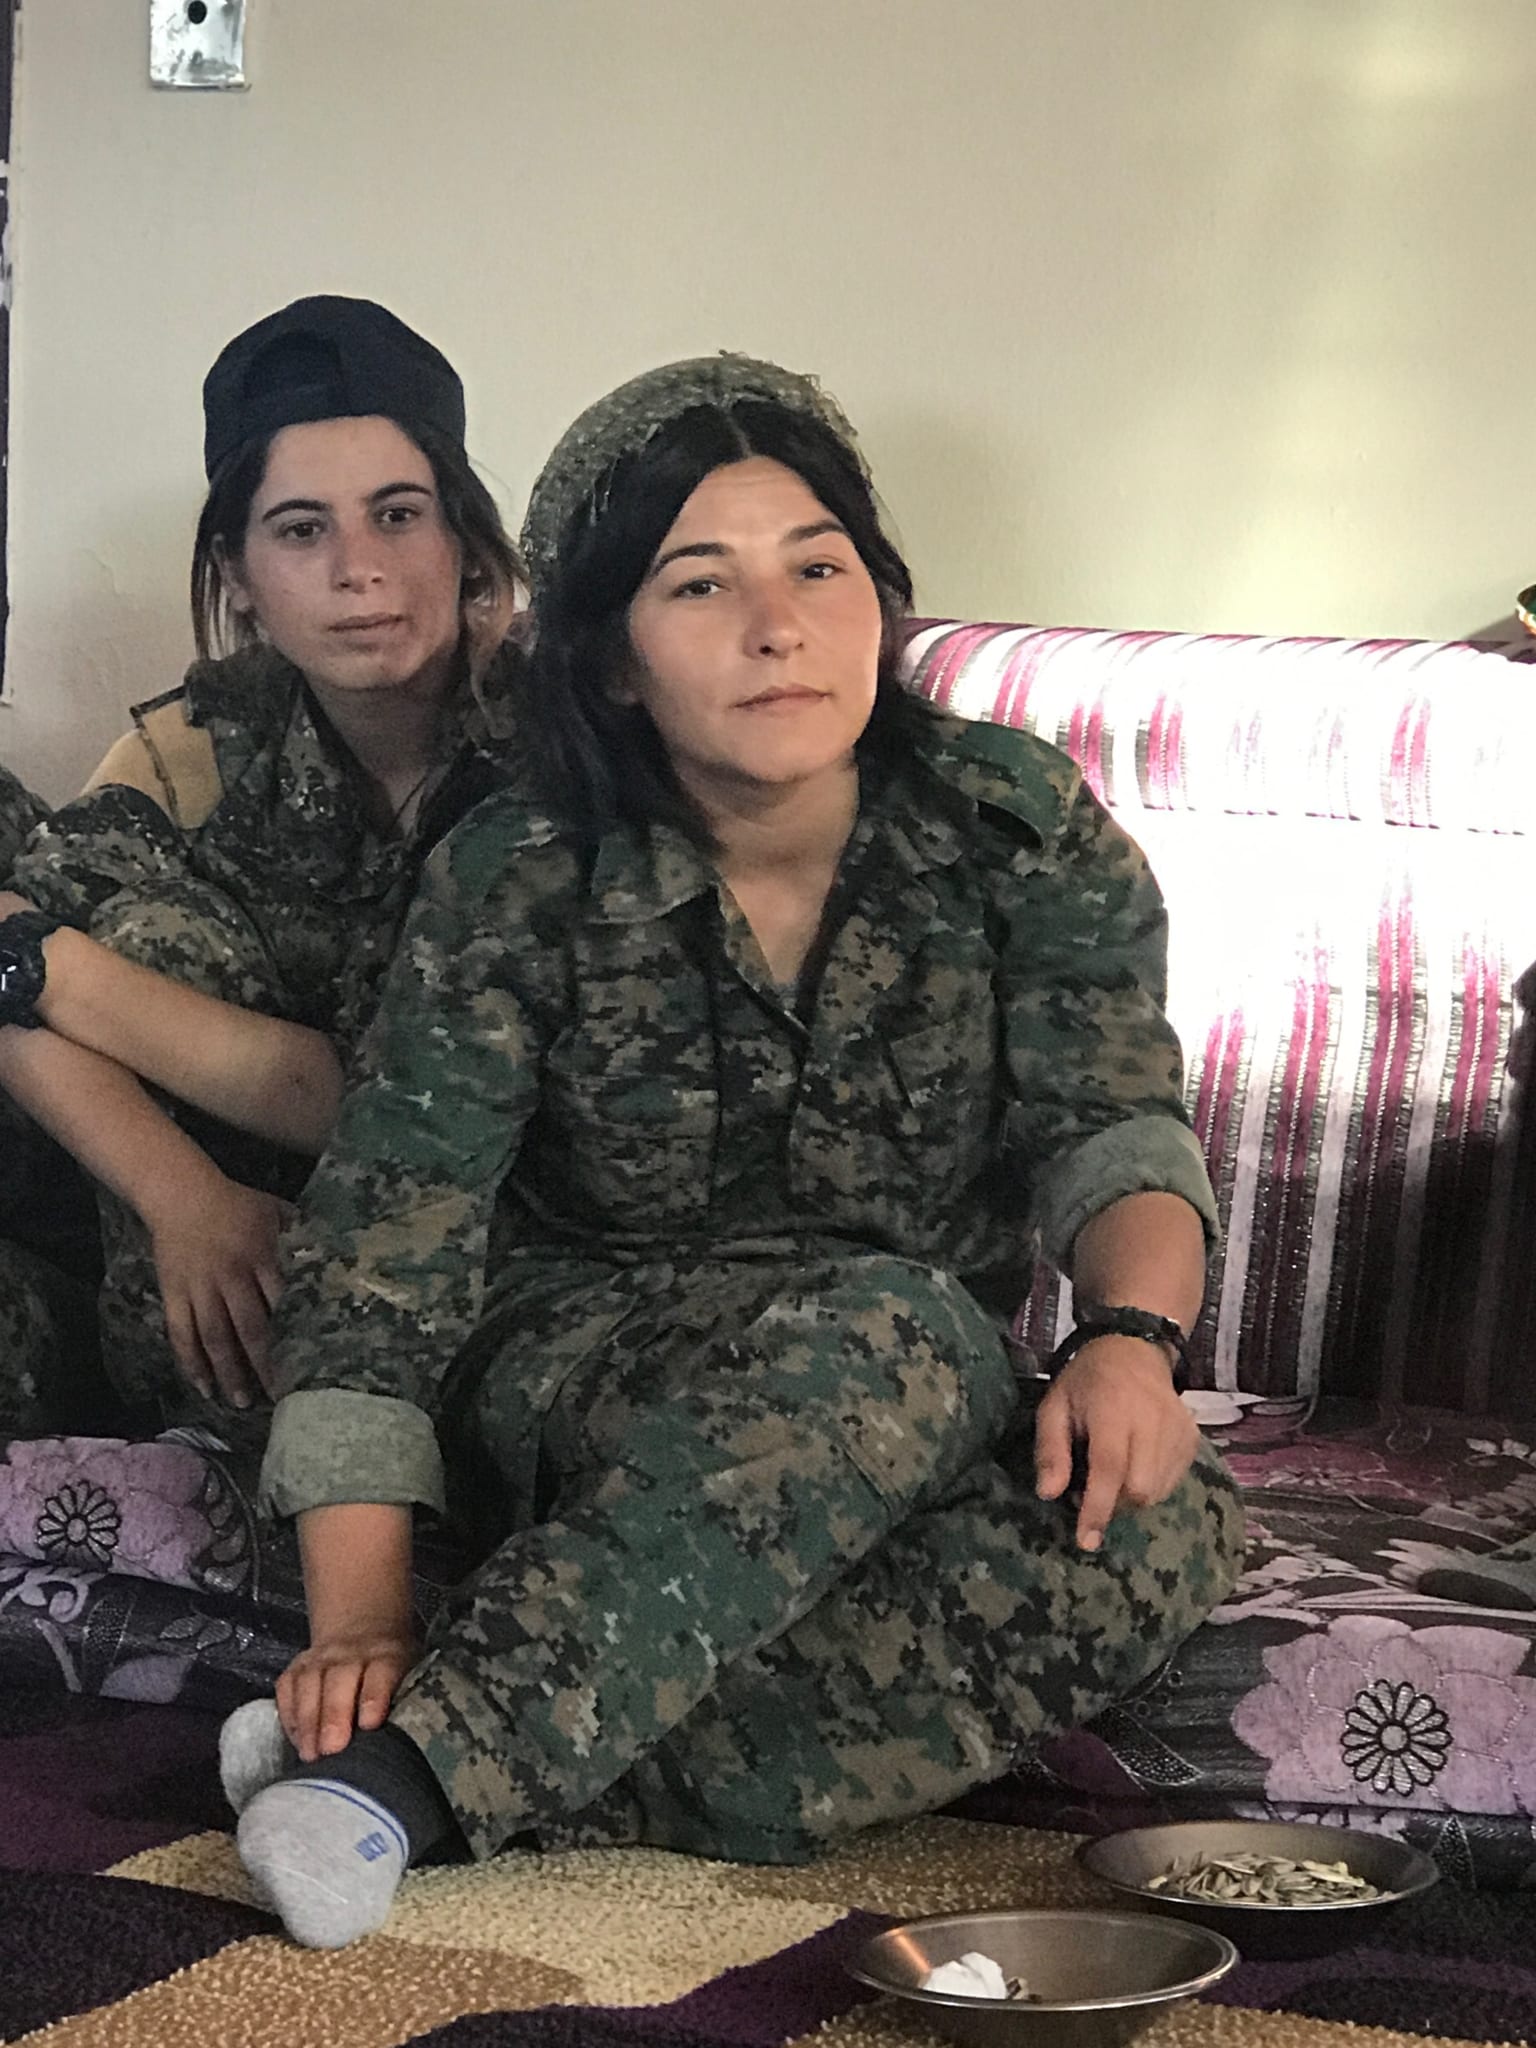 How Dedication, Self-Sacrifice and Courage Can Build a New Democratic, Feminist Society in Rojava, Syria Homeland Security Today